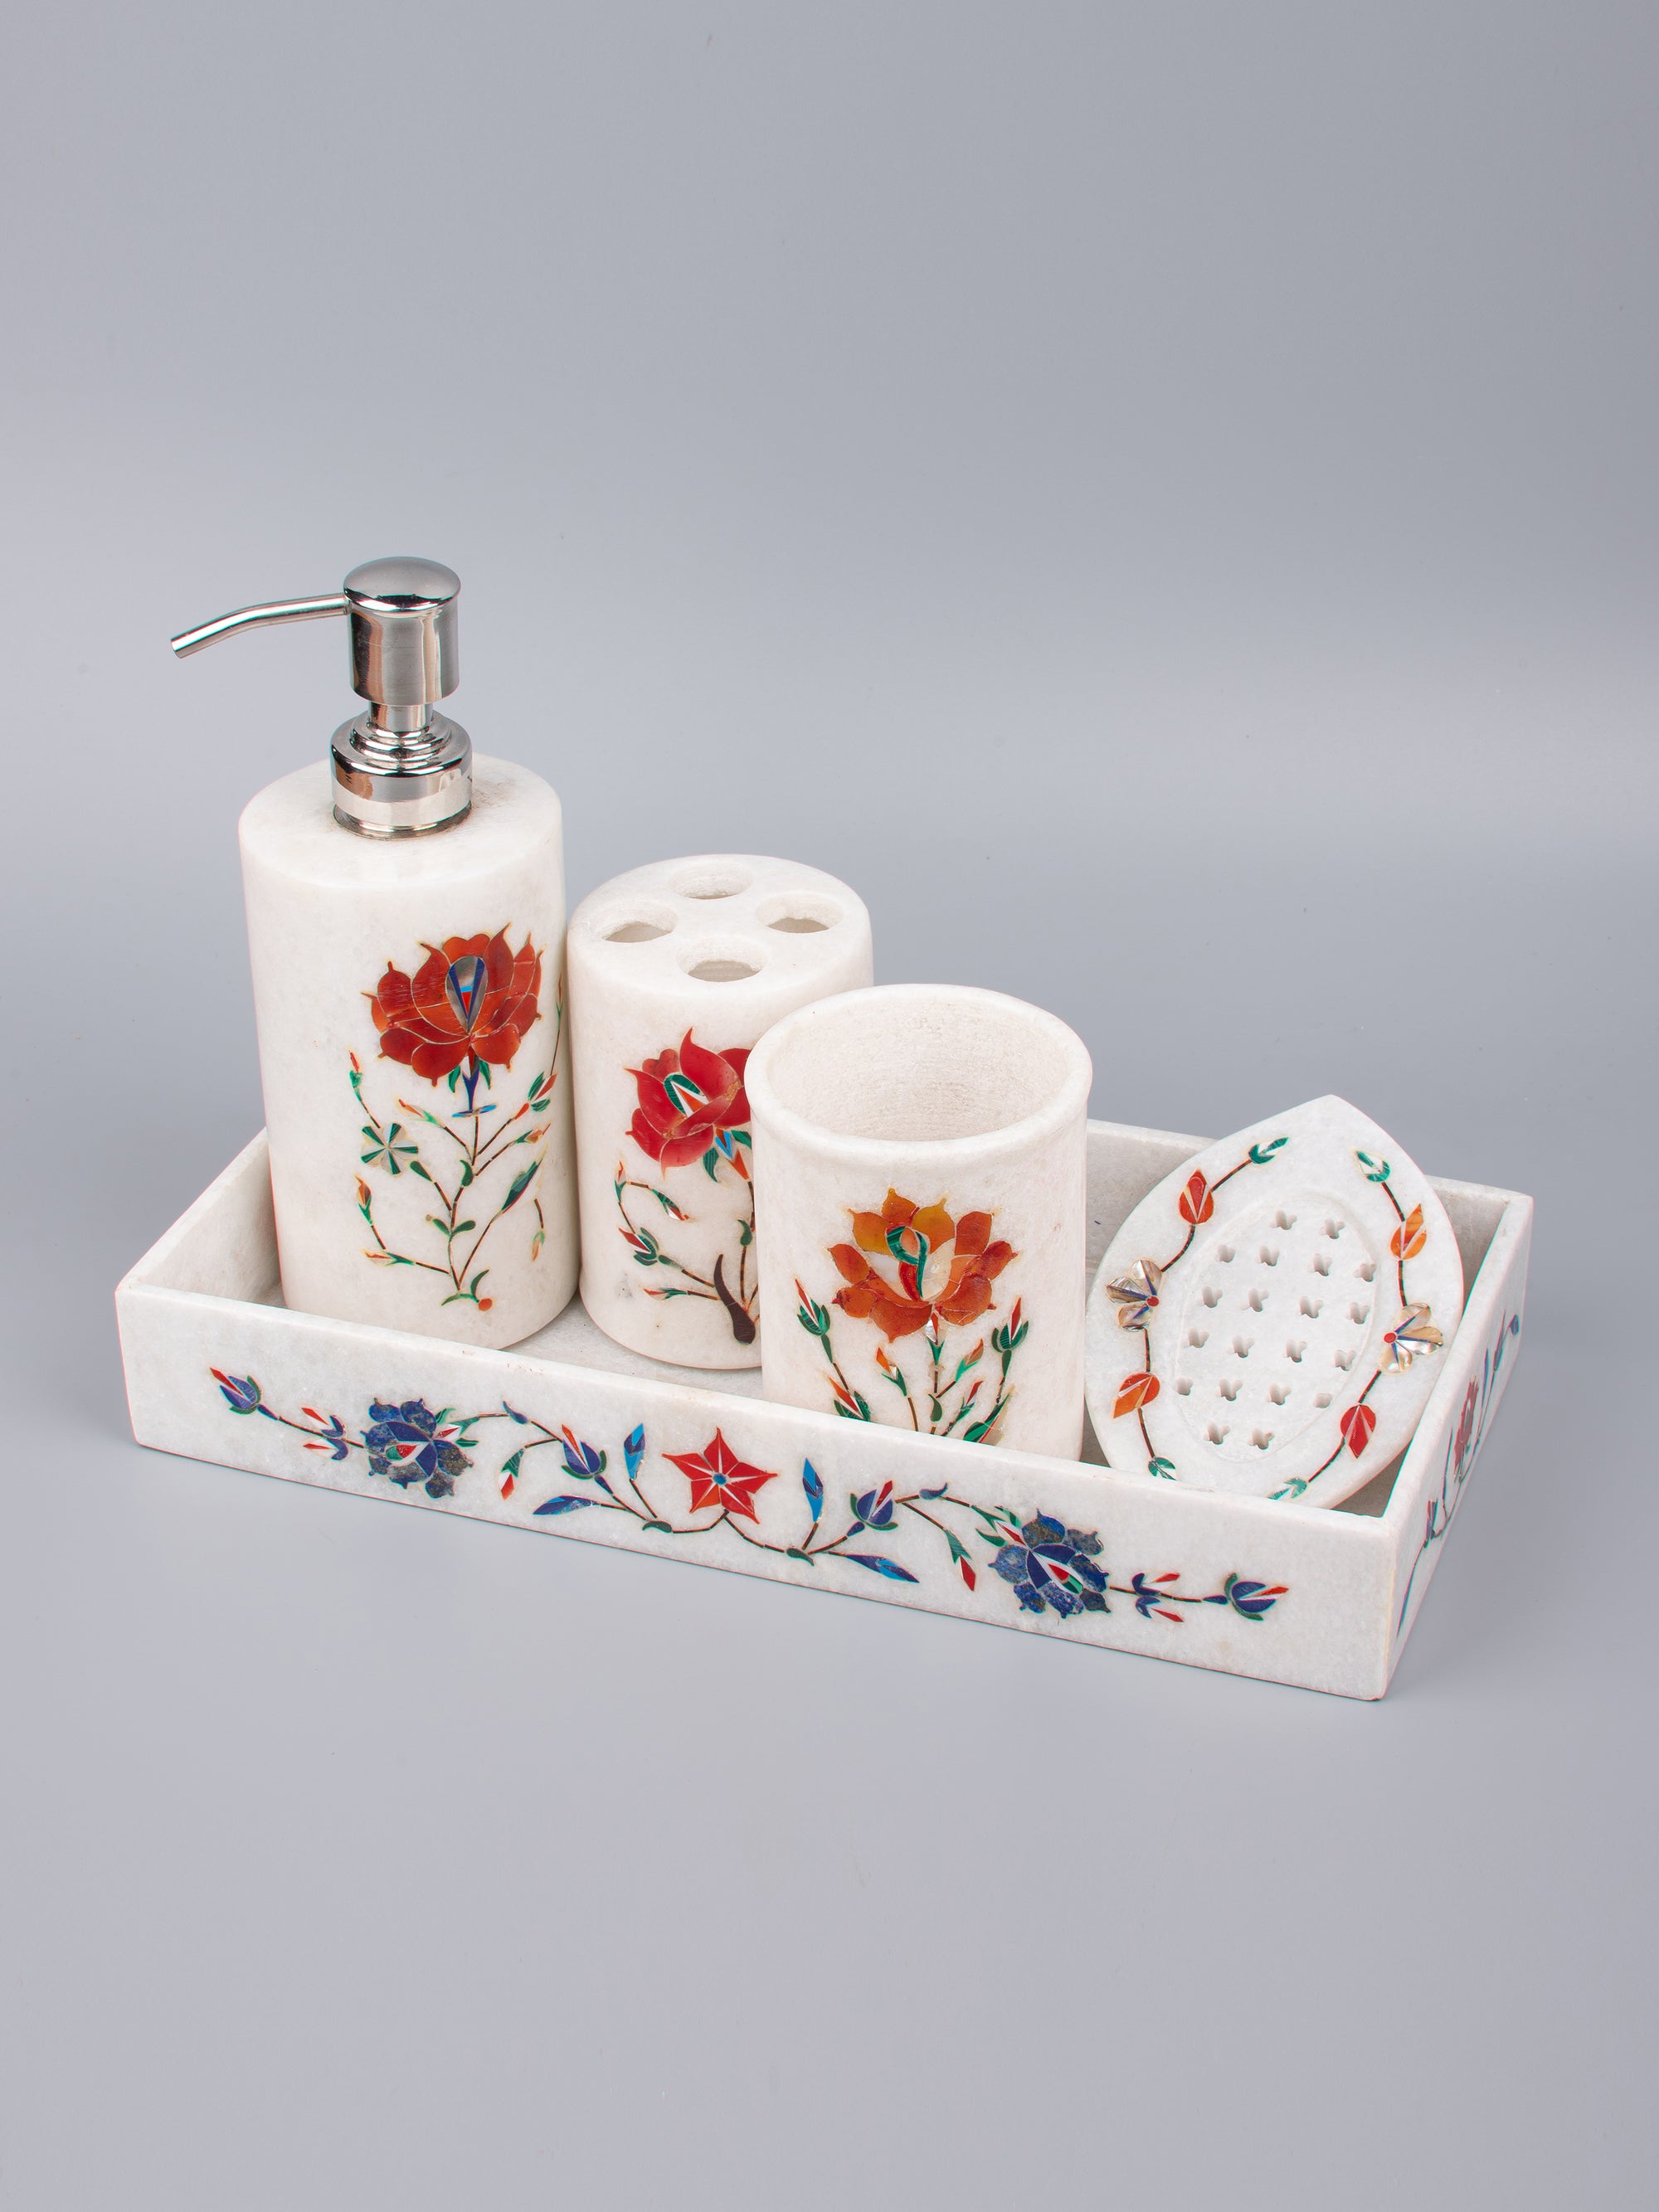 5 pieces bathroom accessories set made of pure marble with colorful inlay work - The Heritage Artifacts